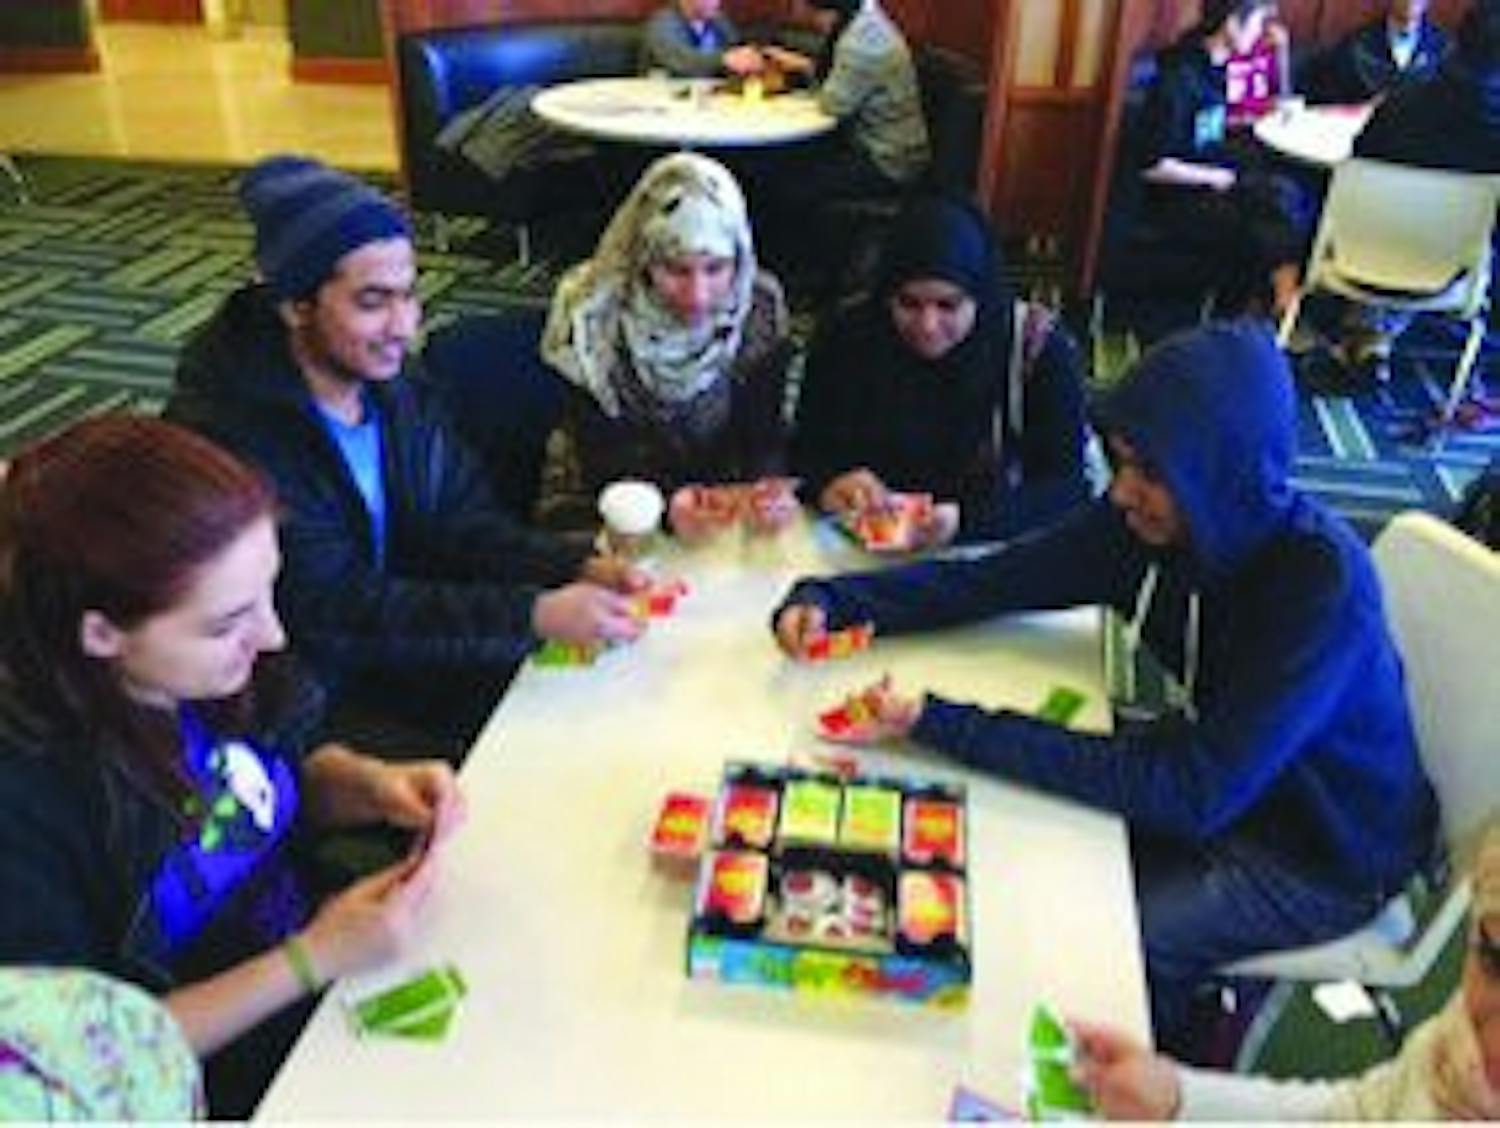 Game Night promotes cultural understanding  